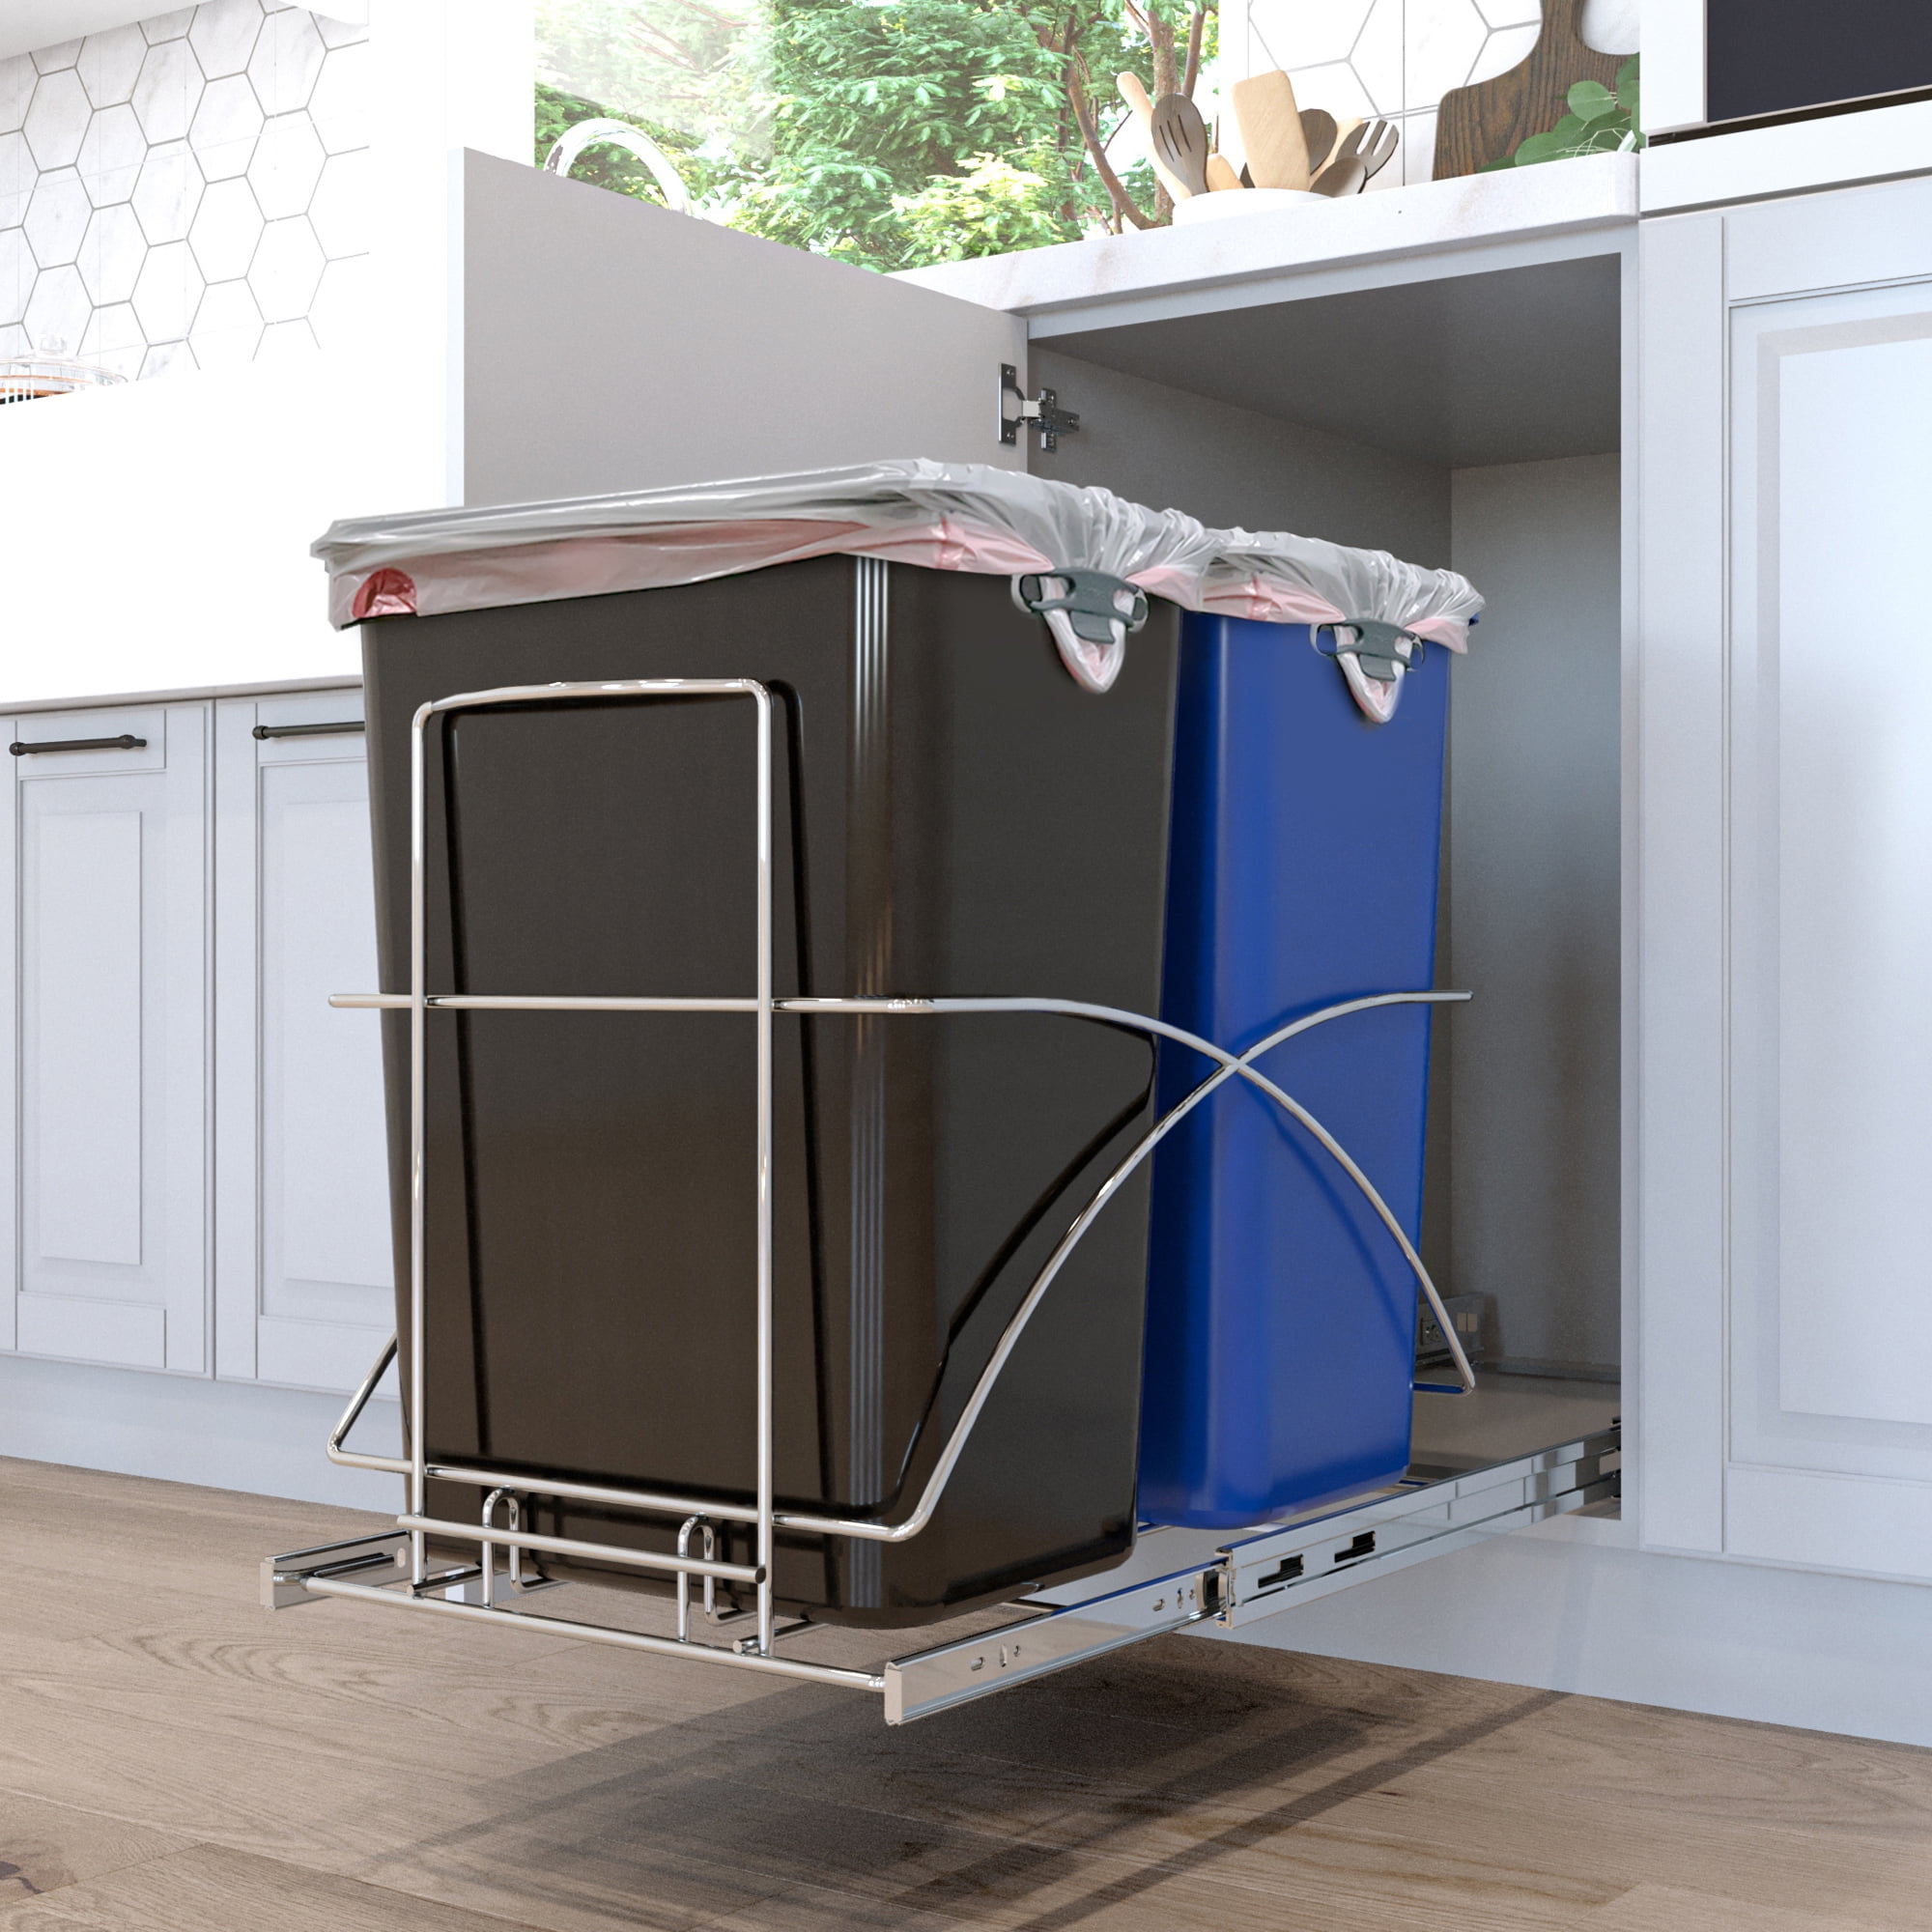 Pull Out Garbage Bins In Outdoor Kitchen Cabinets - 4 Life Outdoor